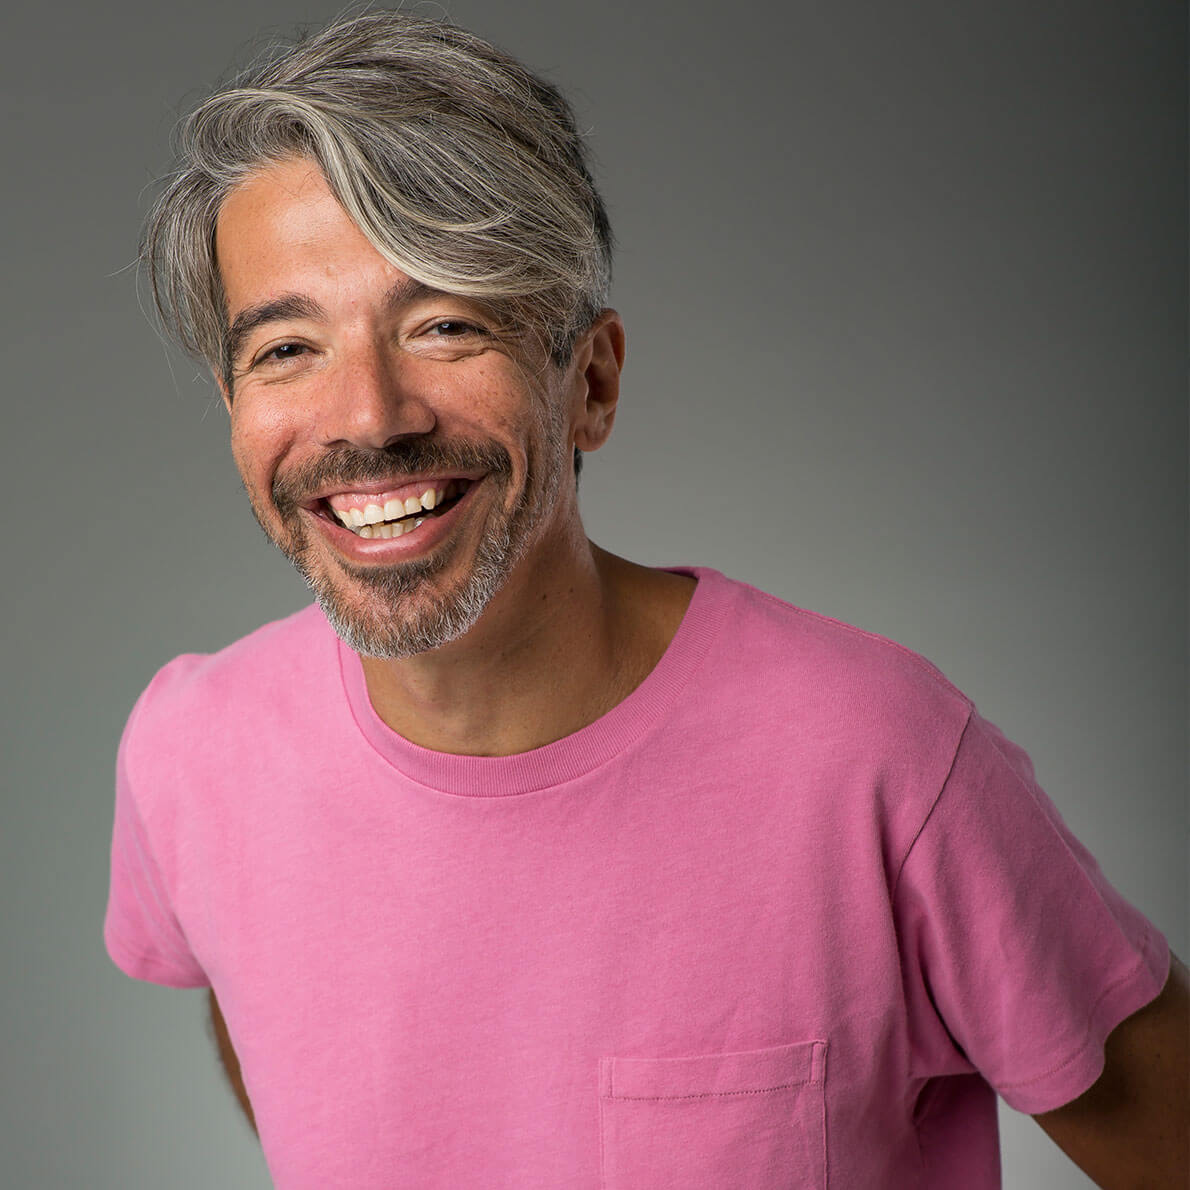 A headshot of a grey-haired man smiling and wearing a pink t-shirt.